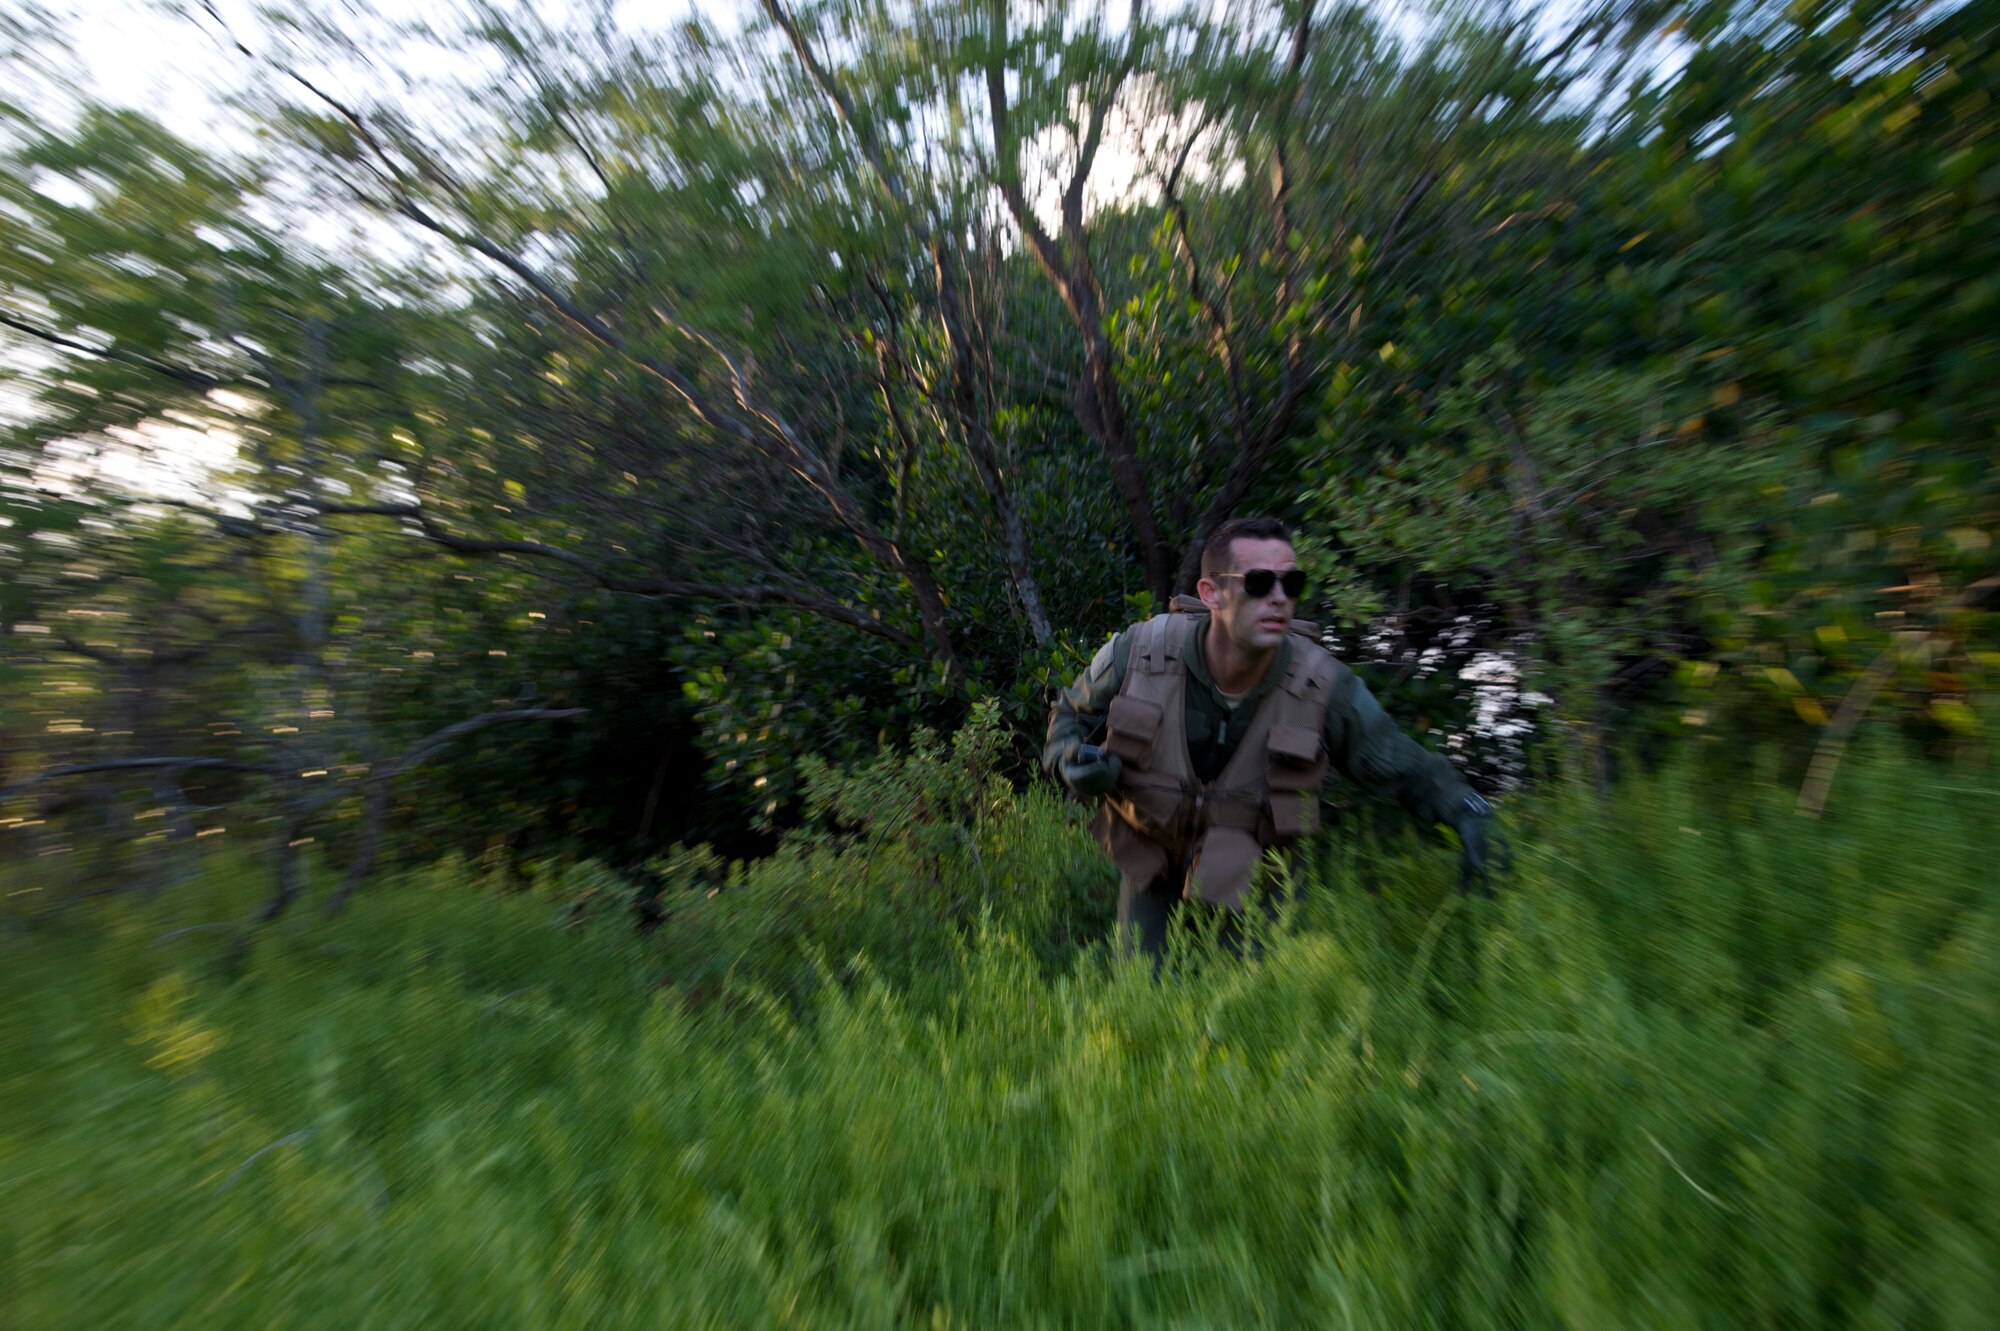 Senior Airman Kenneth Stricker, a boom operator for the 96th Air Refueling Squadron, runs from cover during combat survival training on Joint Base Pearl Harbor-Hickam, Hawaii, March 26, 2015. This training simulates the aircrew going down in a hostile environment. The aircrew uses teamwork to conceal their location, evade opposition forces, and practice proper recovery procedures. (U.S. Air Force photo by Tech. Sgt. Aaron Oelrich/Released)